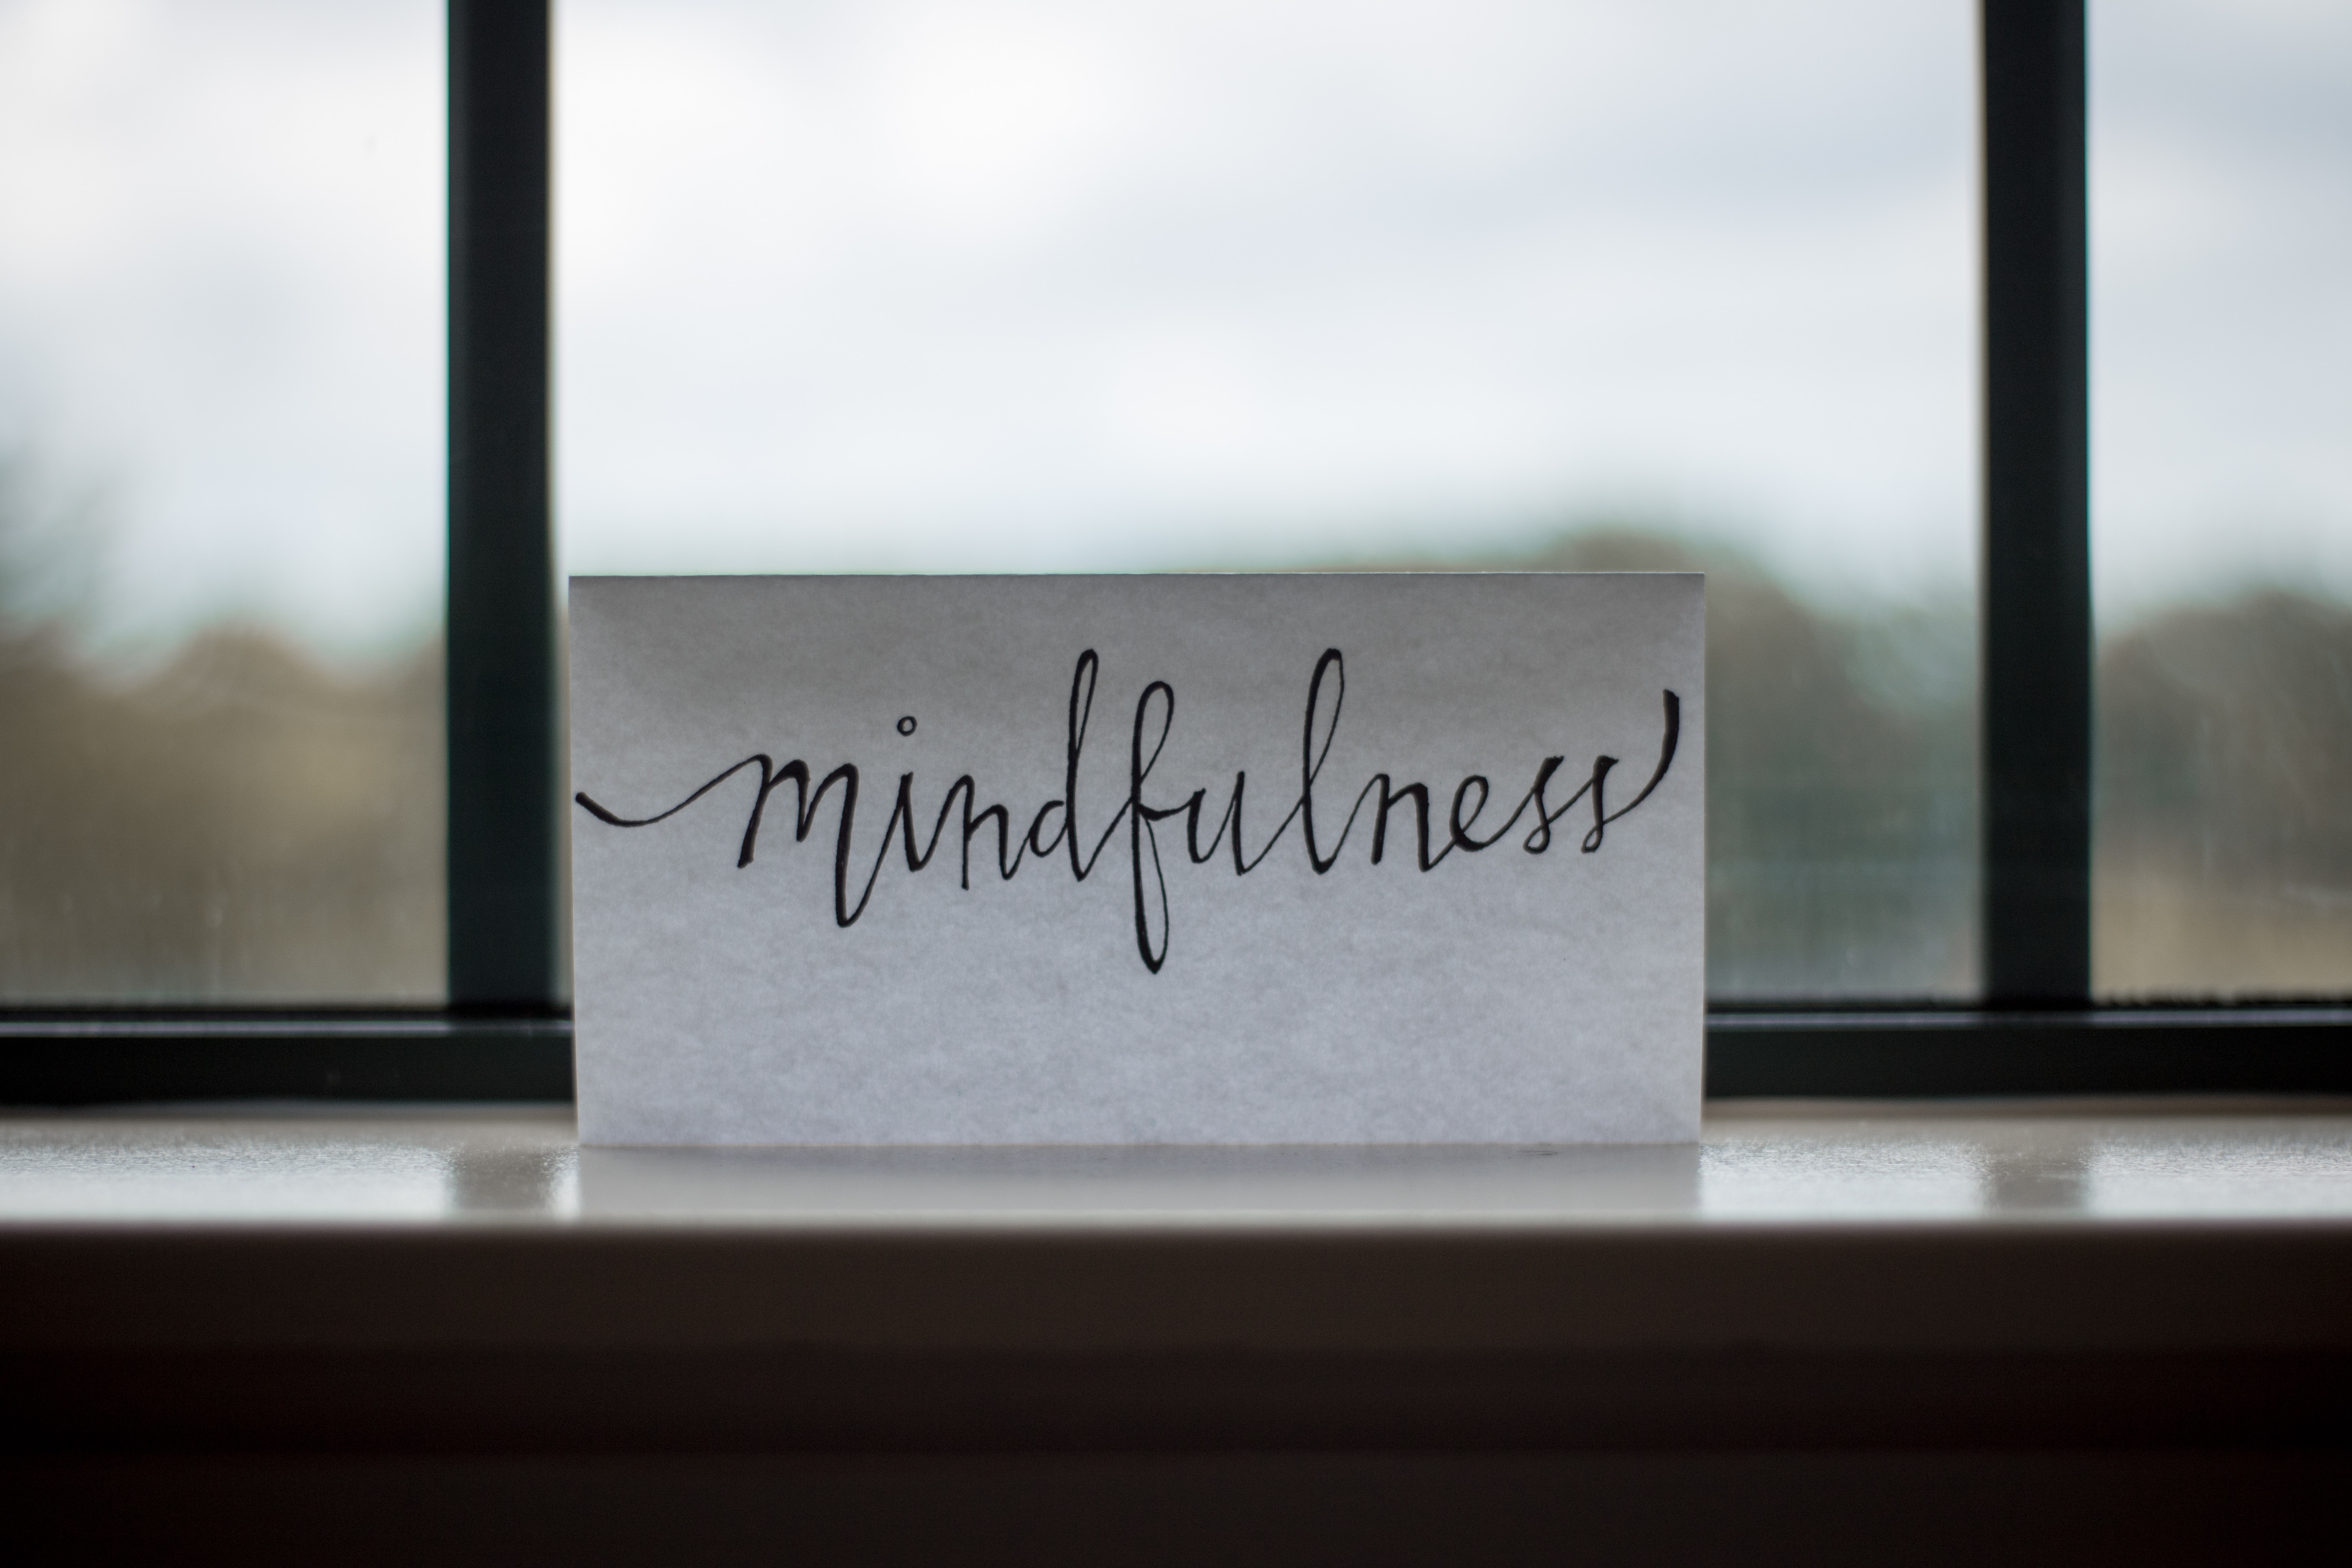 &quot;Mindfulness&quot; wrritten on white paper, standing on the window ledge